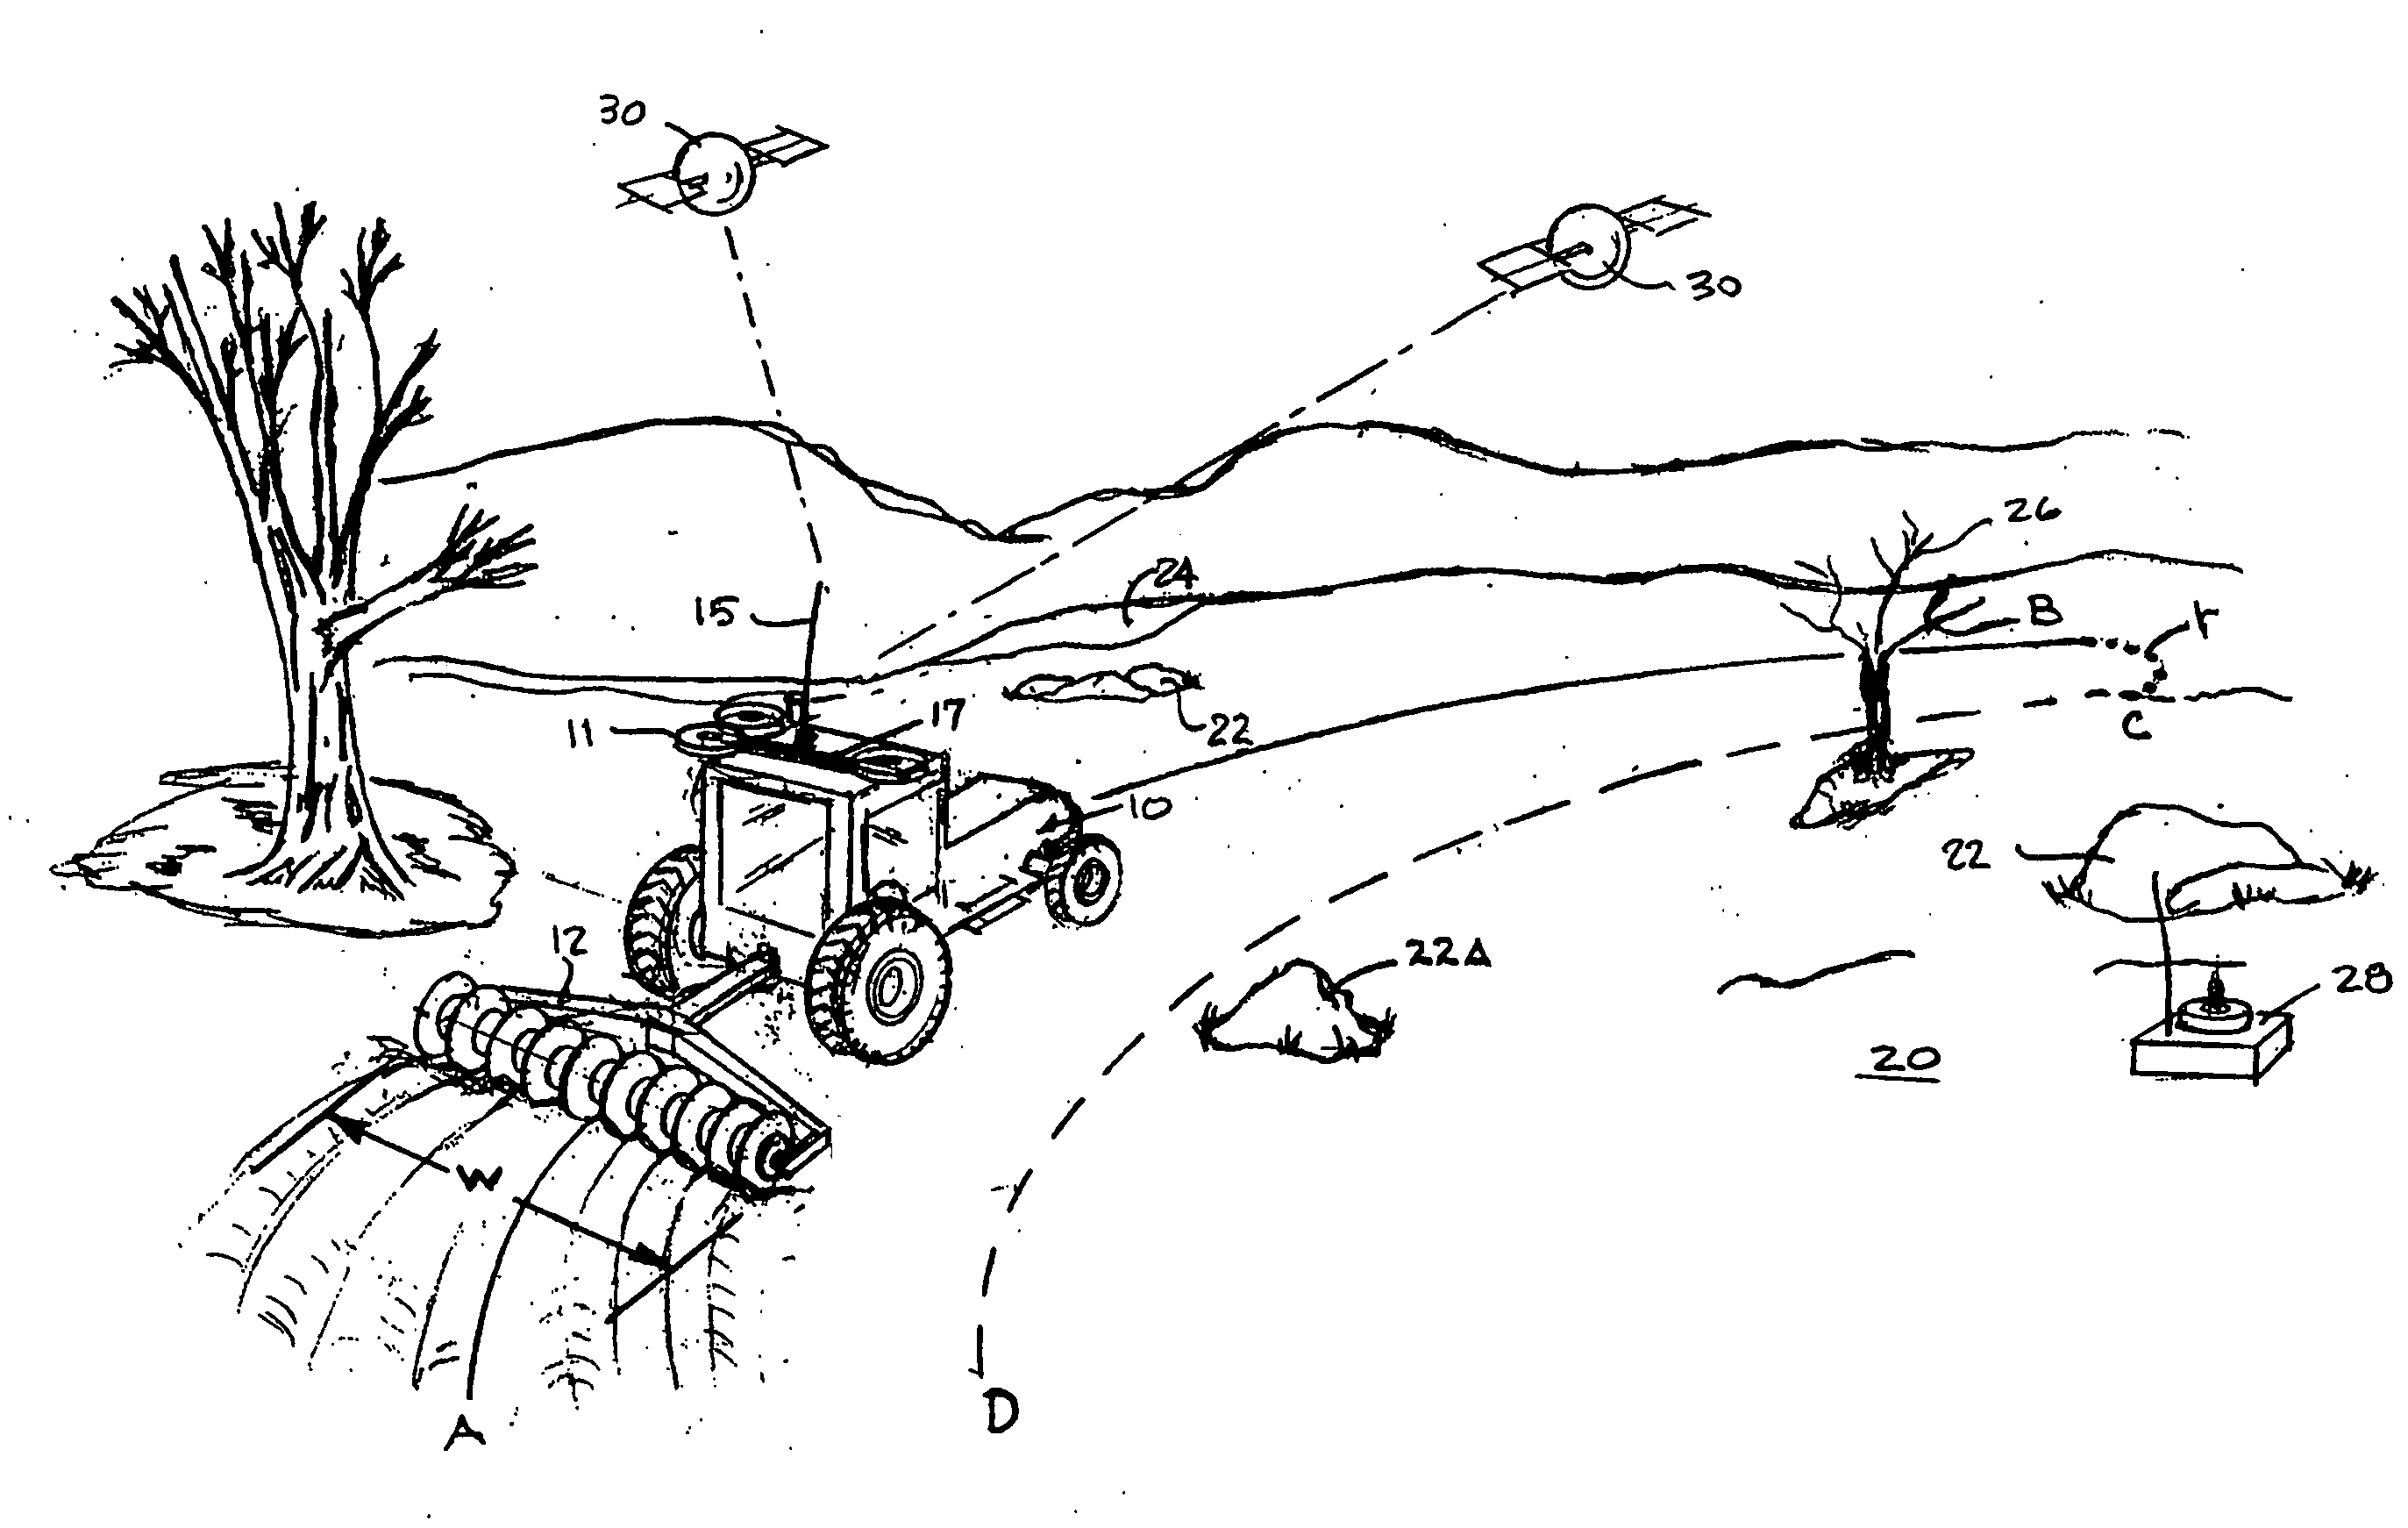 System and method for guiding an agricultural vehicle through a recorded template of guide paths